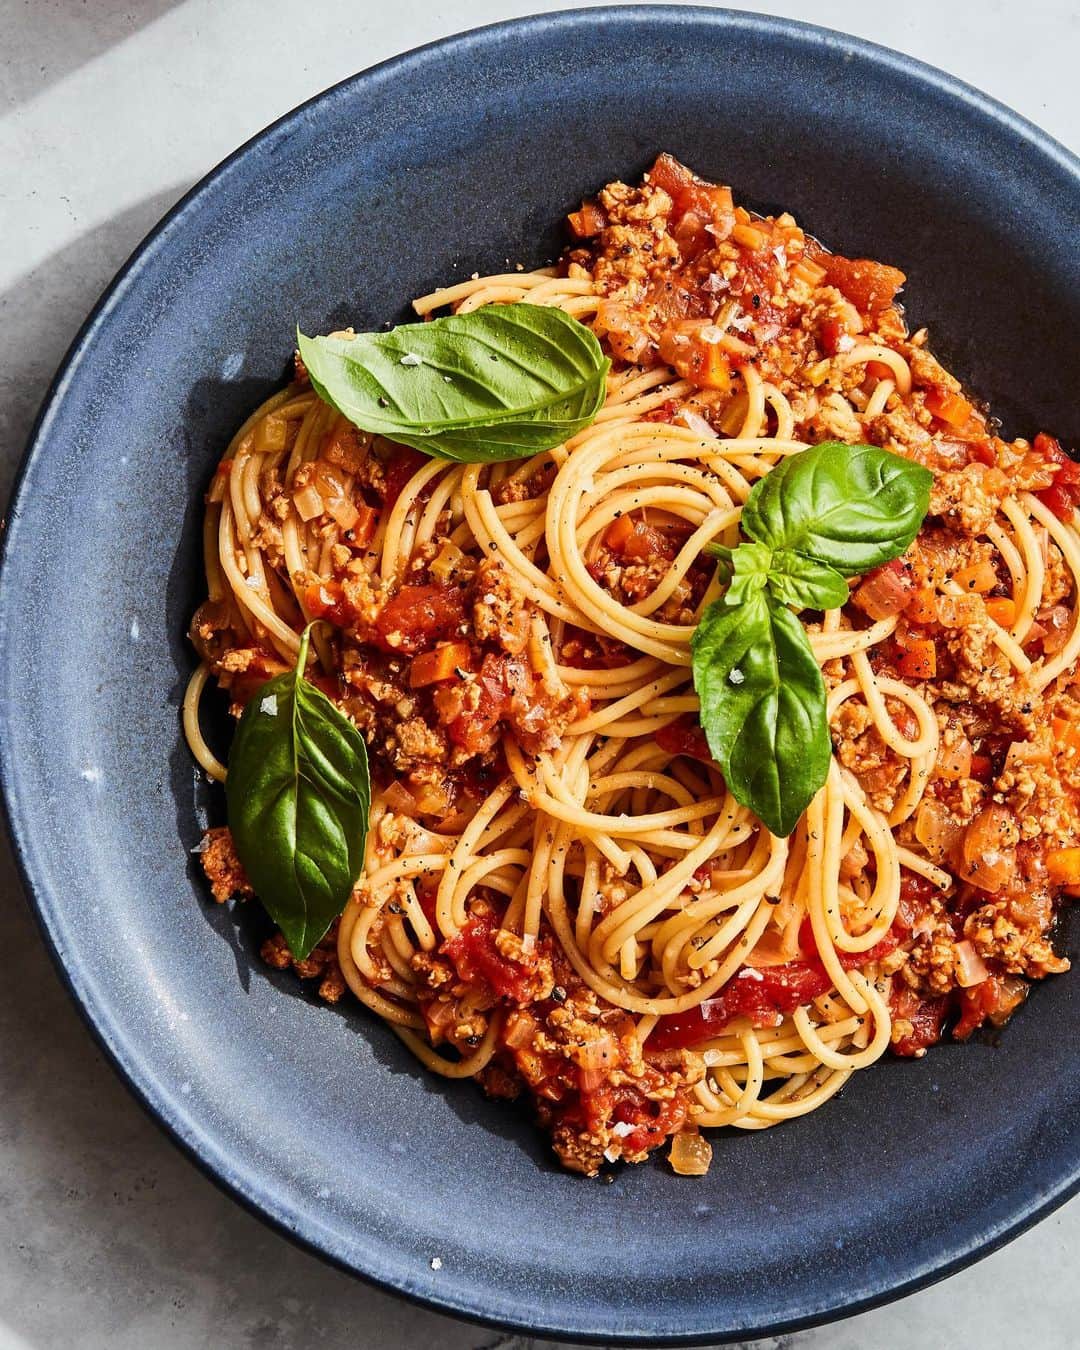 Gaby Dalkinさんのインスタグラム写真 - (Gaby DalkinInstagram)「Guys - we nailed it!! For everyone needing a plant-based bolognese, I just made your life so much easier! #LightlifePartner The new @lightlifefoods Plant-Based Ground is the perfect way to make this delish bolognese with pasta. And guess what - it freezes perfectly if you want to make a double or triple batch and keep it on hand for the holiday season! Bonus: the ground is made with simple ingredients you actually know - water, pea protein, beets and garlic powder. No weird / hard to pronounce things in this bolognese! #Lightlife #CleanBreak   Prep Time // Cook Time // Serves 4   1 yellow onion, diced 1 carrot, diced  1 celery stalk, diced  2 cloves garlic, chopped 2 tablespoons olive oil 1 teaspoon dried Italian seasoning 1 package Lightlife Plant-Based Ground  1 teaspoon kosher salt 1/4 teaspoon freshly ground black pepper 1/2 cup dry white wine 1 (28-ounce) can whole peeled tomatoes Spaghetti and basil to serve    Heat 2 tablespoons of olive oil in a Dutch oven or heavy bottom pot over medium heat until shimmering. Add the vegetables and garlic and cook, stirring occasionally, until softened, 6 to 8 minutes.   Add the plant-based ground, Italian seasoning, kosher salt, and black pepper. Break up the Lightlife into small pieces with a wooden spoon, and cook until browned, 6 to 8 minutes.    Pour in 1/2 cup dry white wine and simmer until reduced completely, about 1 minute. Add 1 (28-ounce) can whole peeled tomatoes and their juices, breaking up the tomatoes with your hands as you add them to the pot. Bring the sauce to a simmer and cook until thickened slightly and the flavors are developed, about 15 minutes. Serve over pasta.」12月12日 11時04分 - whatsgabycookin